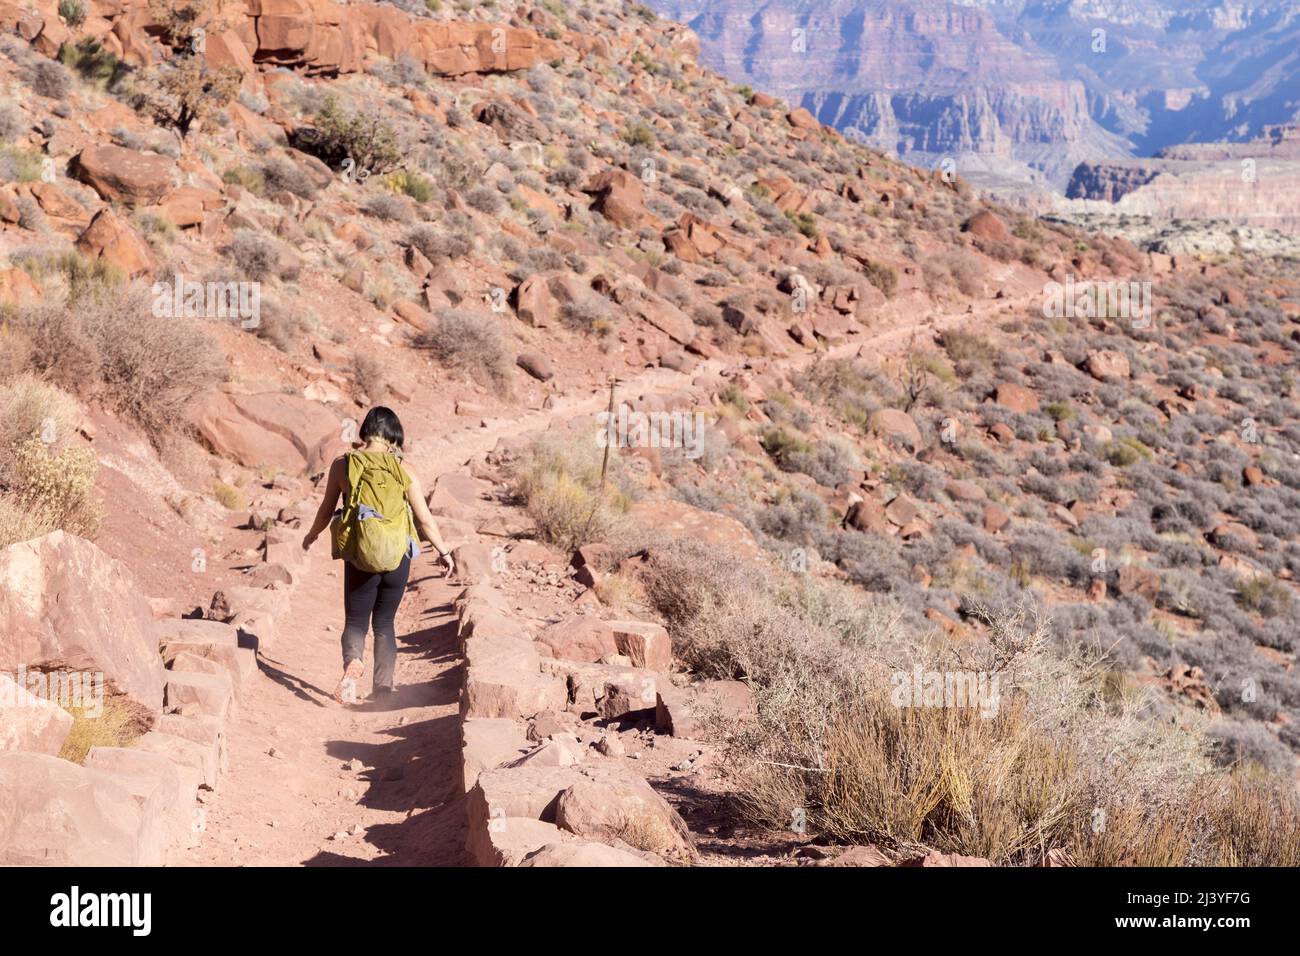 Female Hiker in Athletic Clothing and Backpack Descending South Kaibab Hiking Trail, Grand Canyon National Park Arizona USA Stock Photo